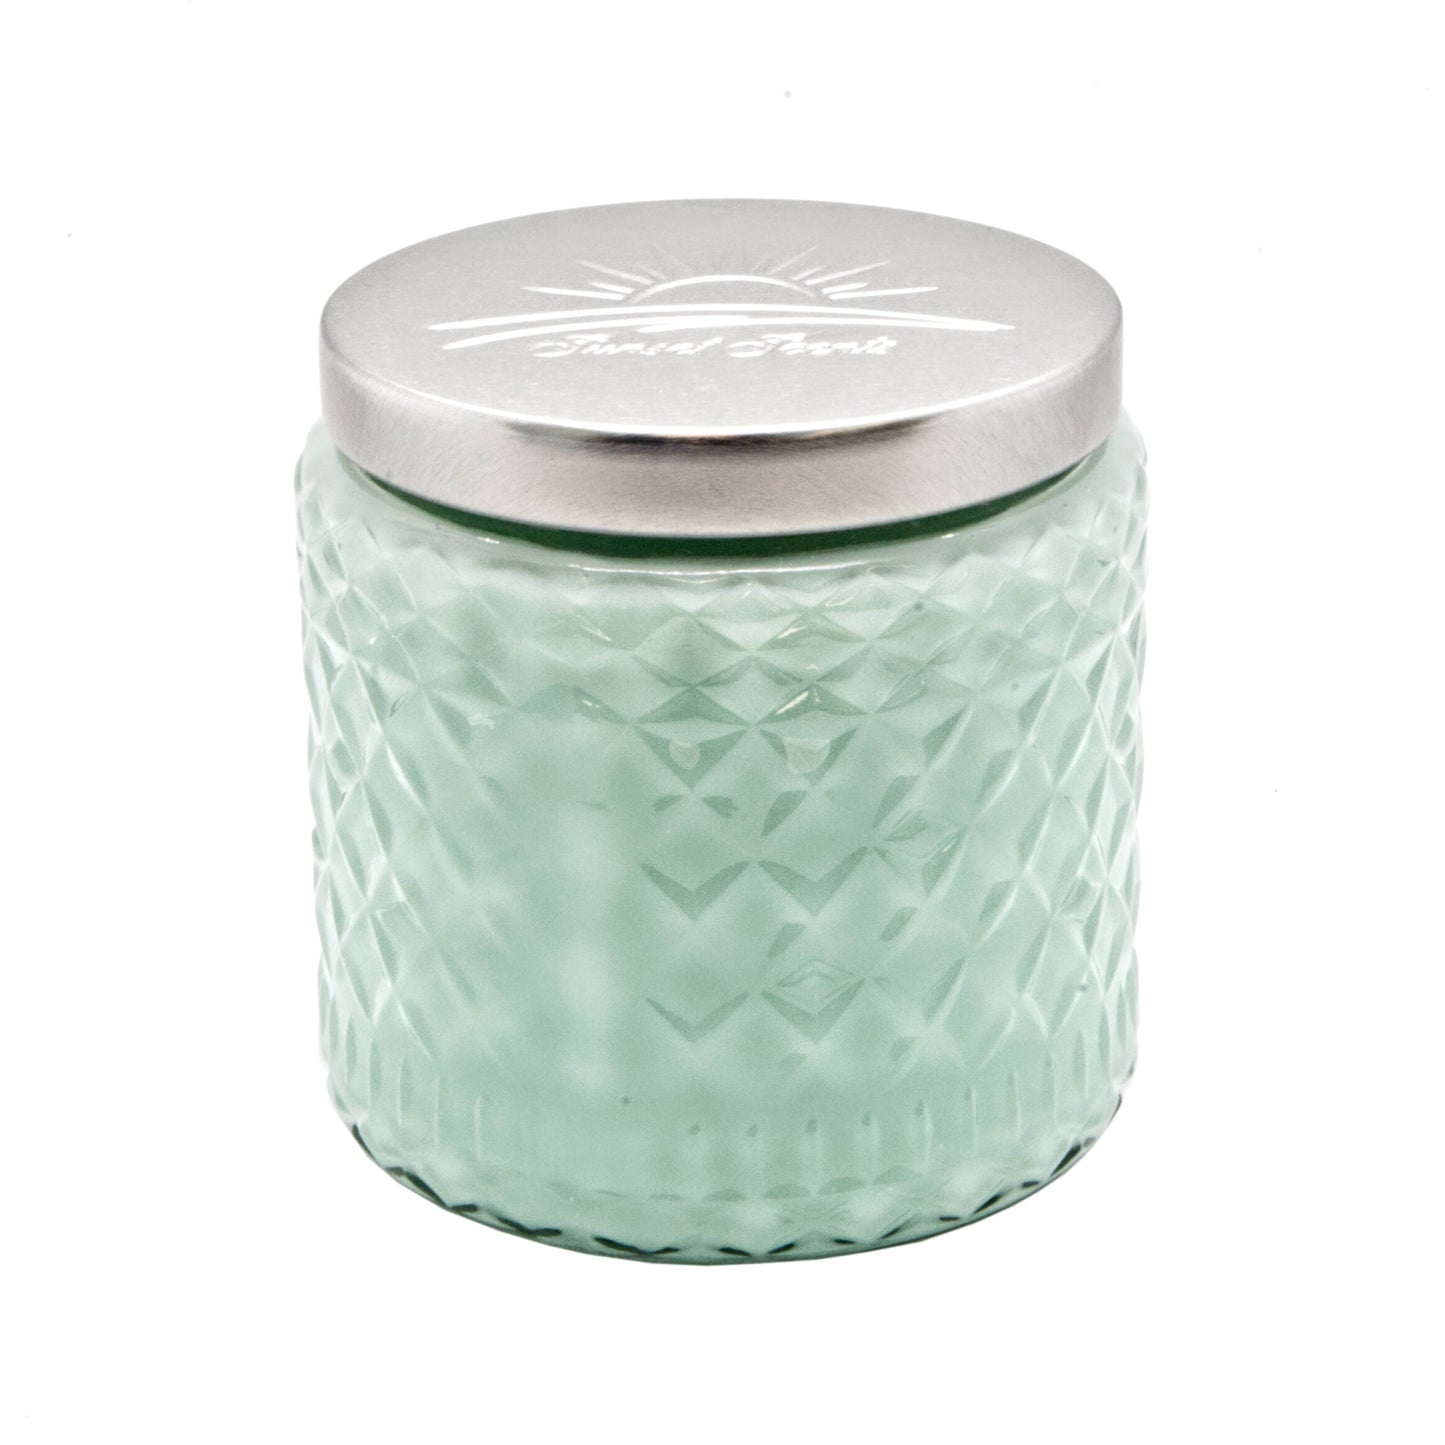 Cucumber Melon Scented Candle